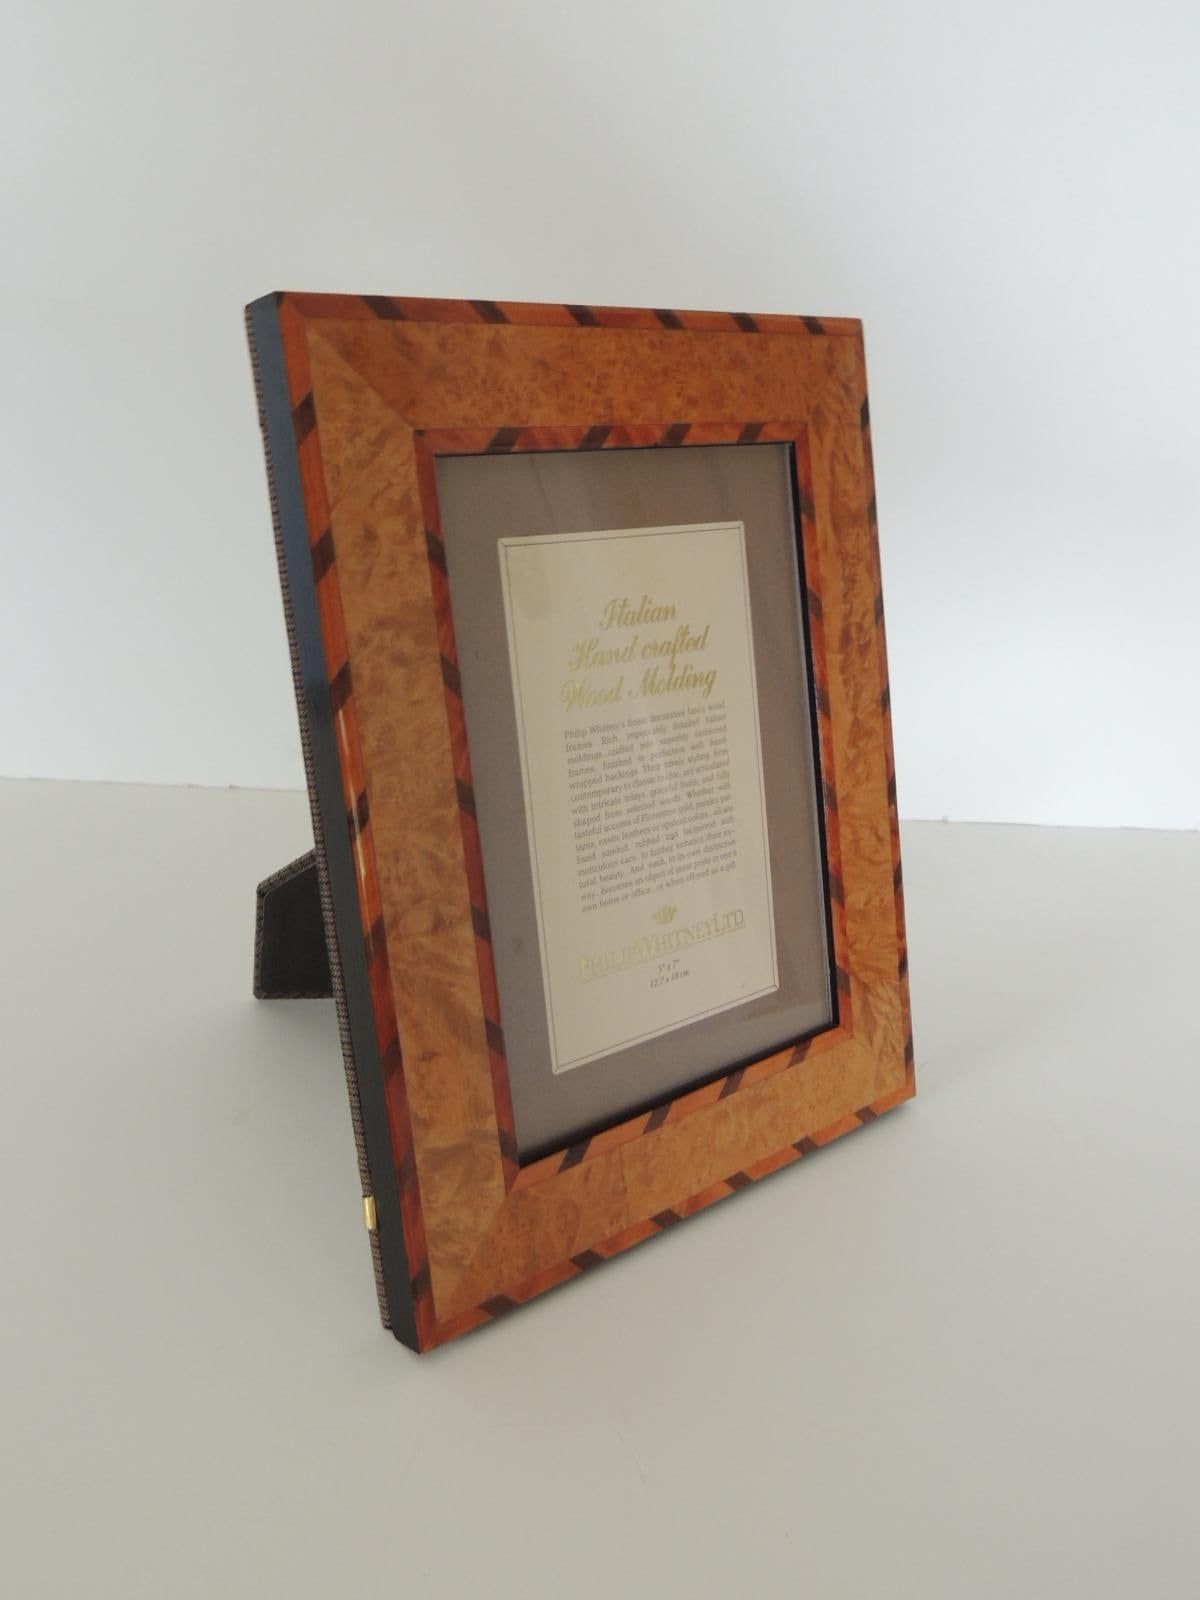 Italian handcrafted inlaid wood picture frame.
Size: 7.5